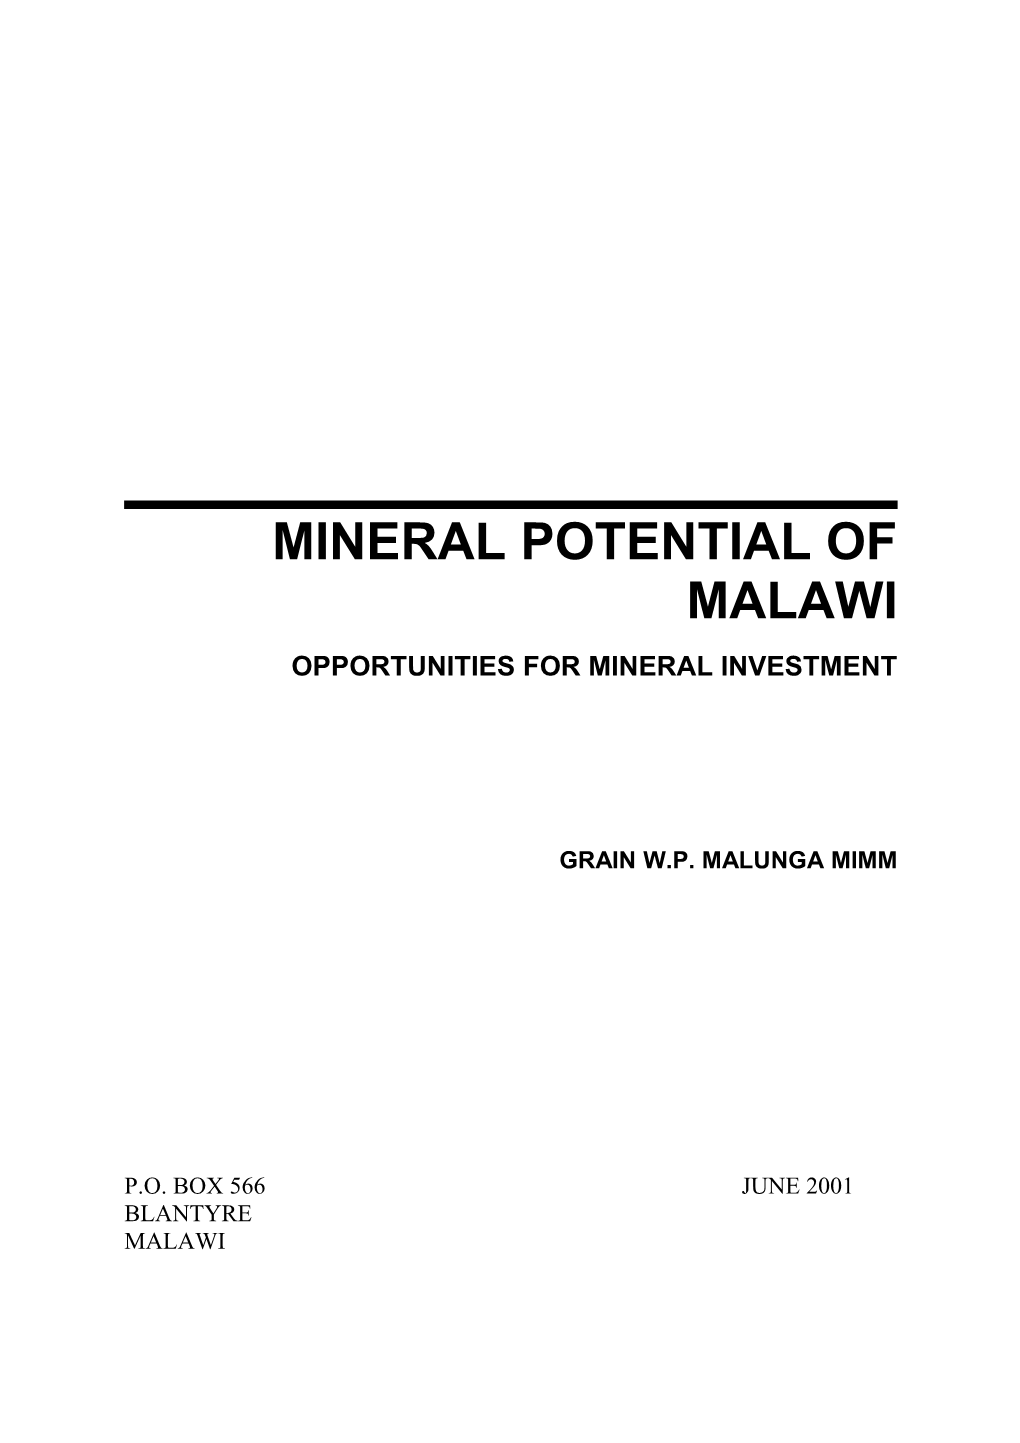 Mineral Potential of Malawi